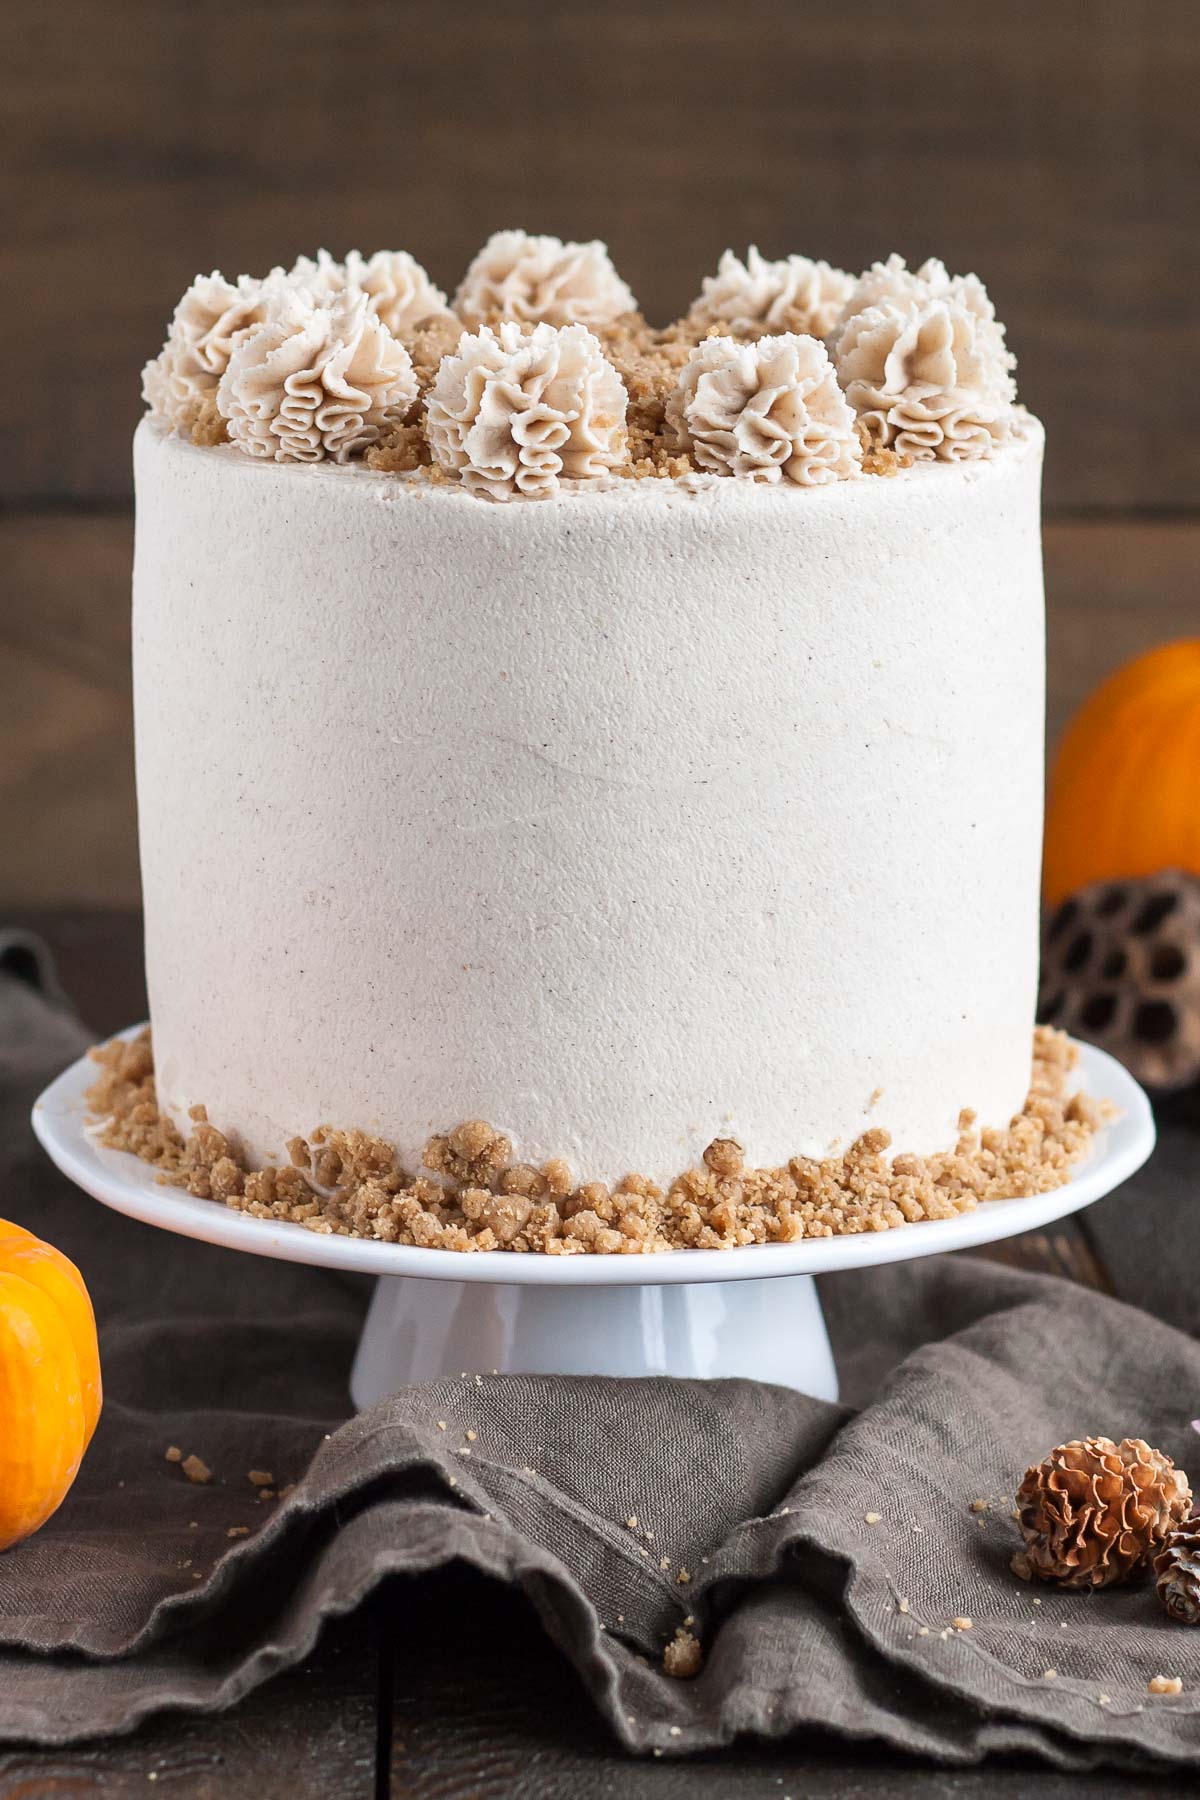 Cake on a cake stand with fall decor in the background.